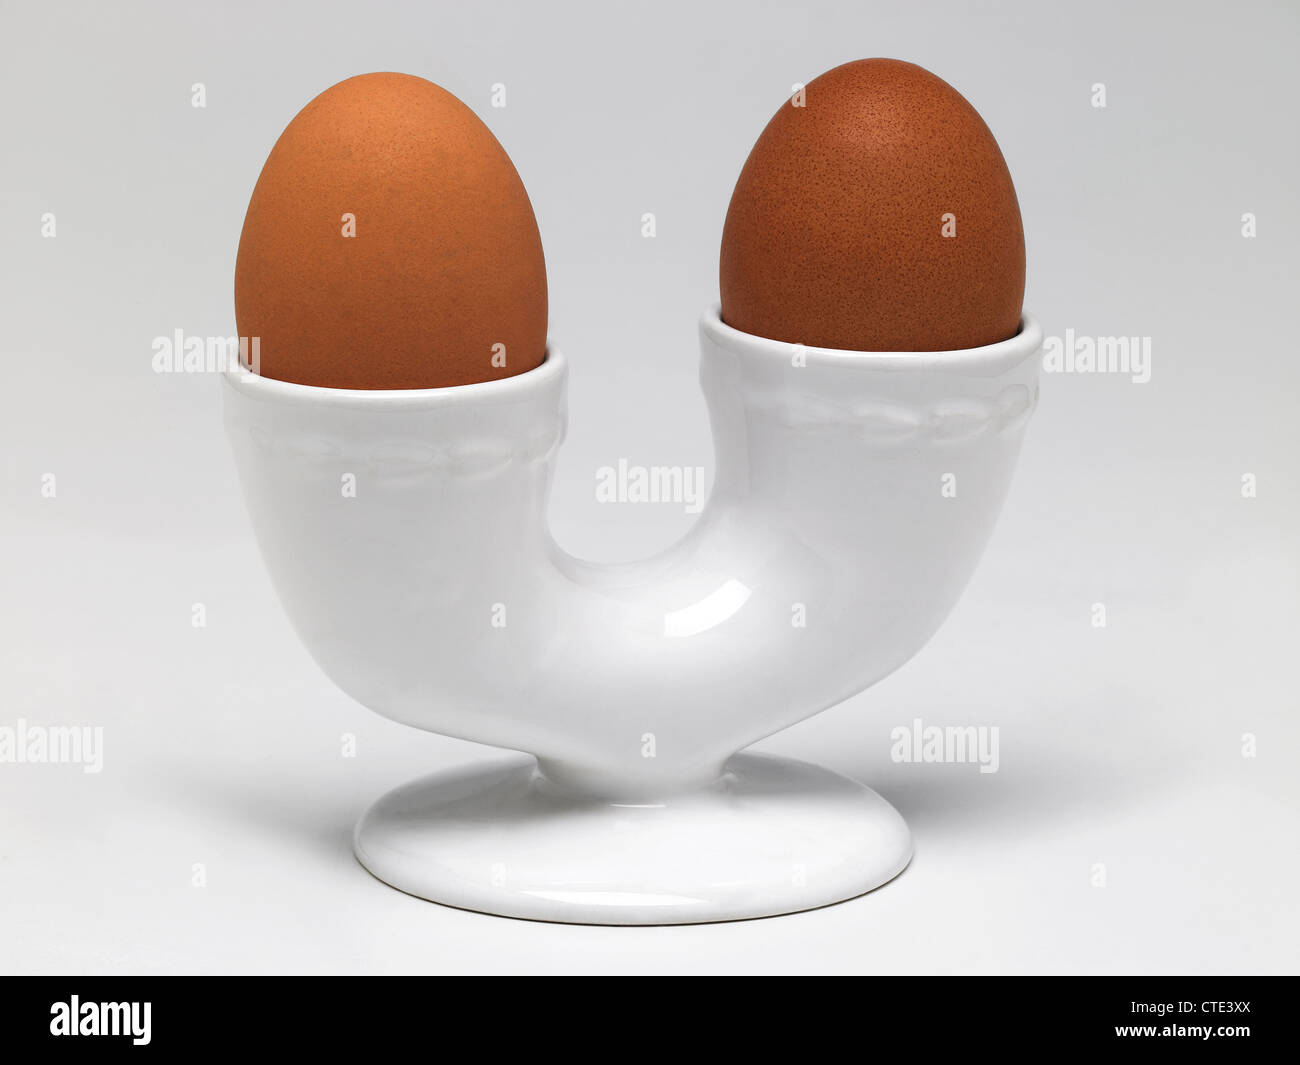 https://c8.alamy.com/comp/CTE3XX/two-boiled-eggs-in-a-double-egg-cup-CTE3XX.jpg